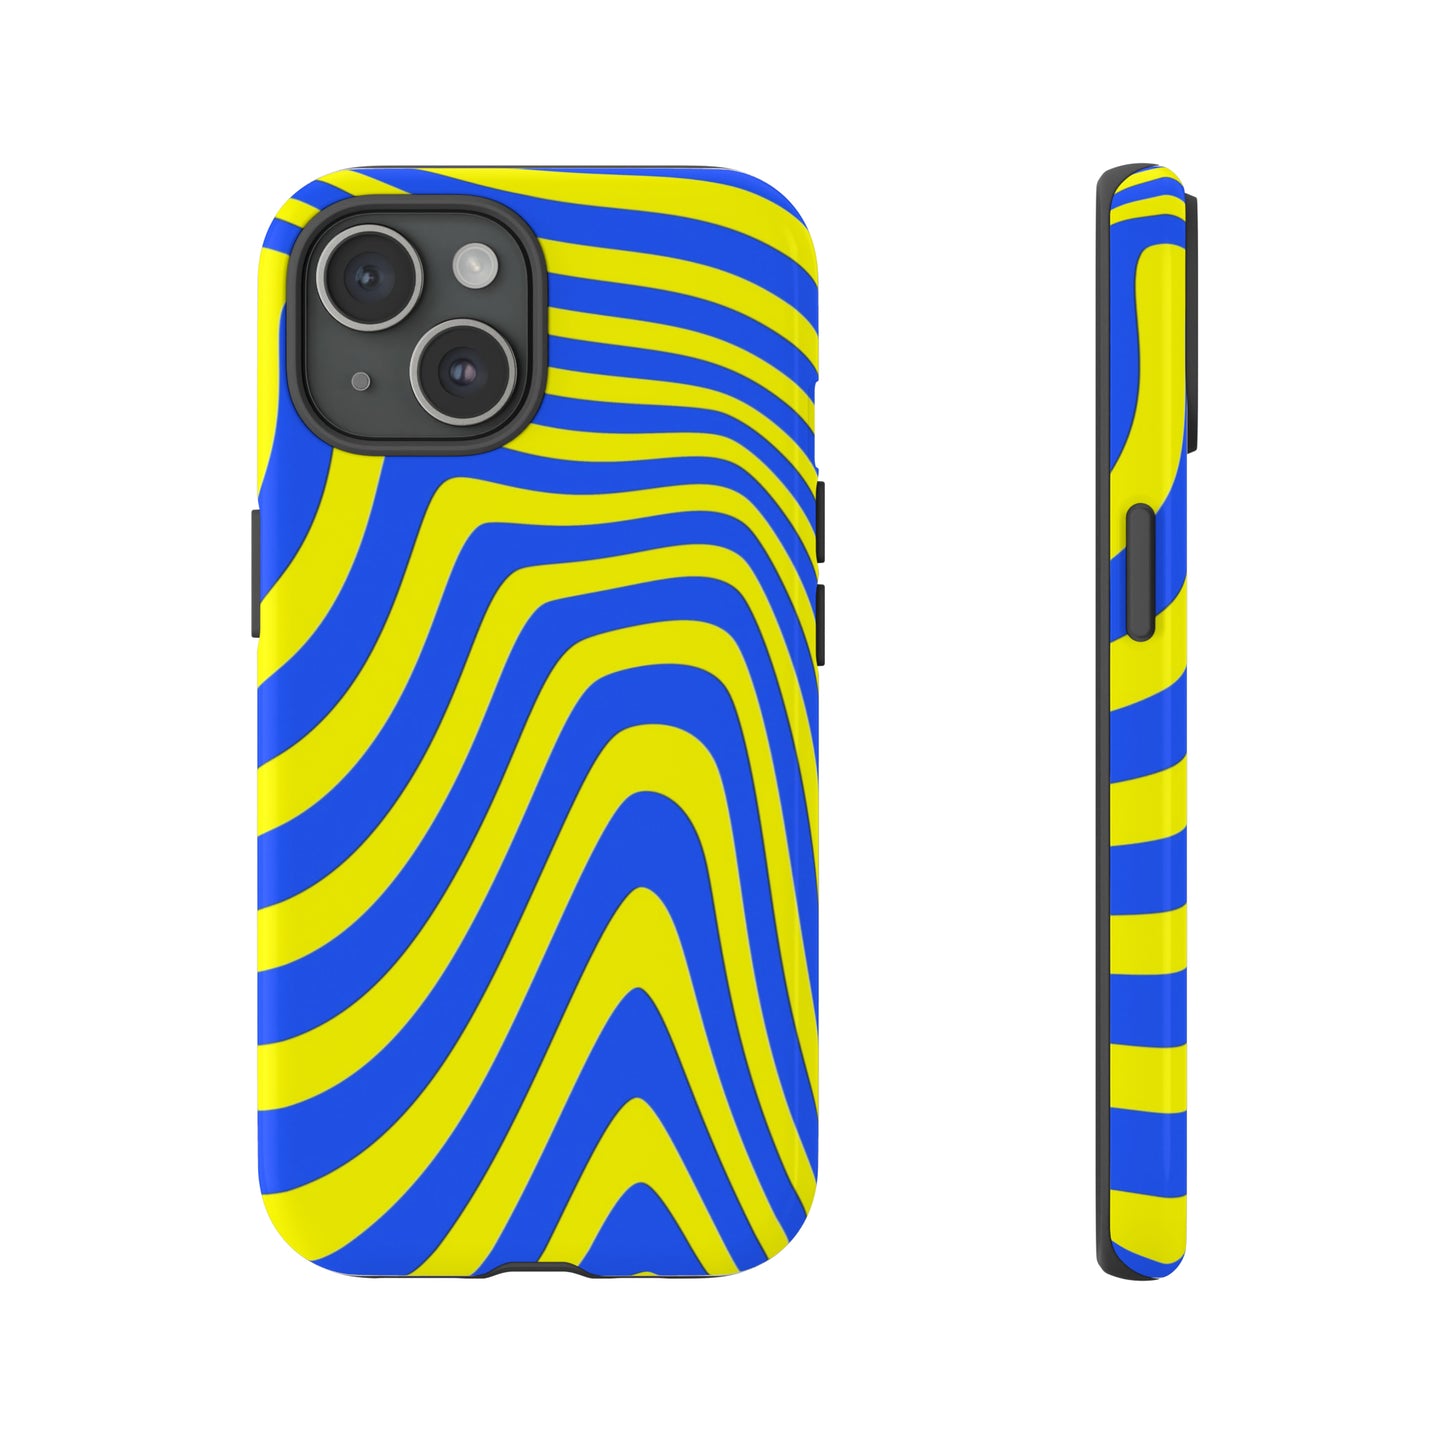 Retro wavy - yellow and blue - Tough Cases